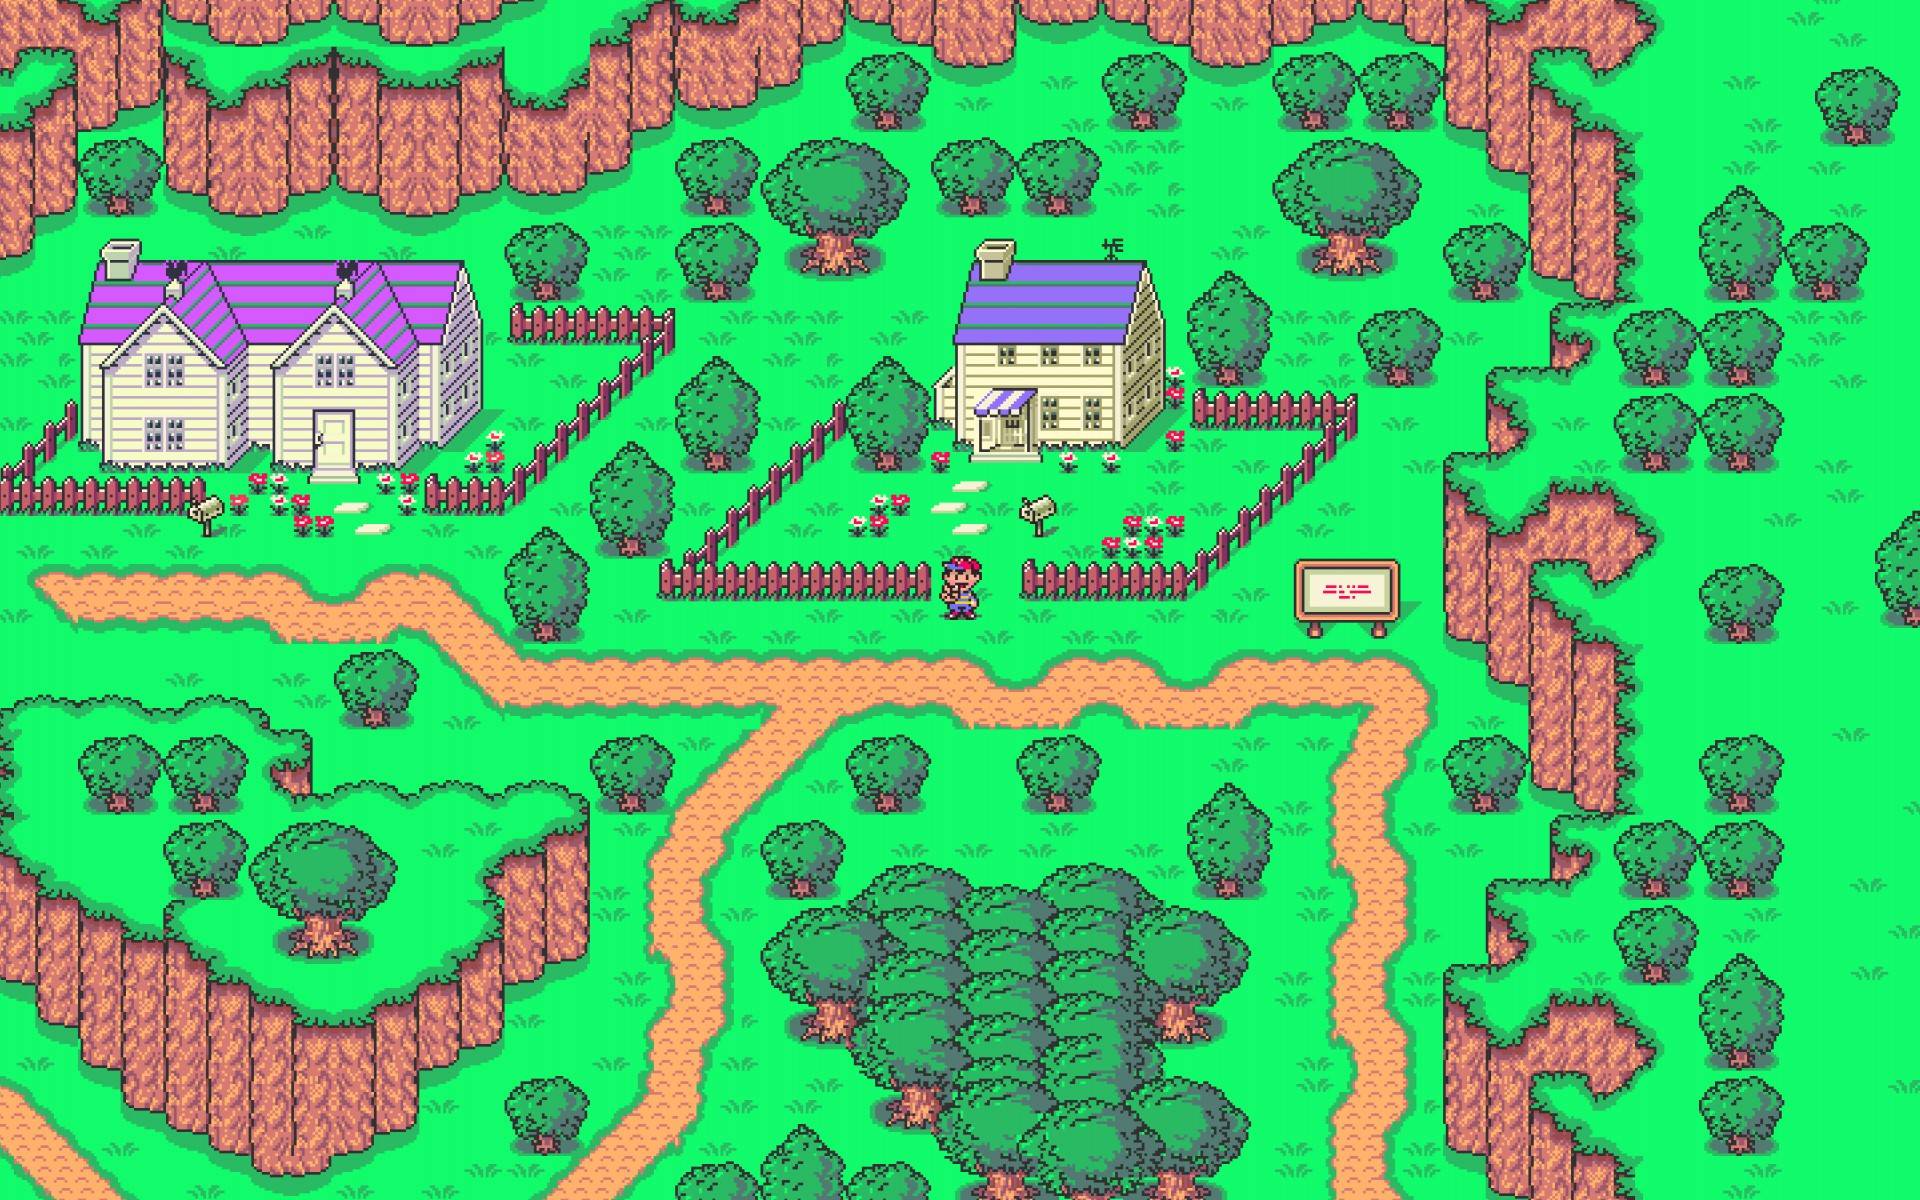 download earthbound game for sale